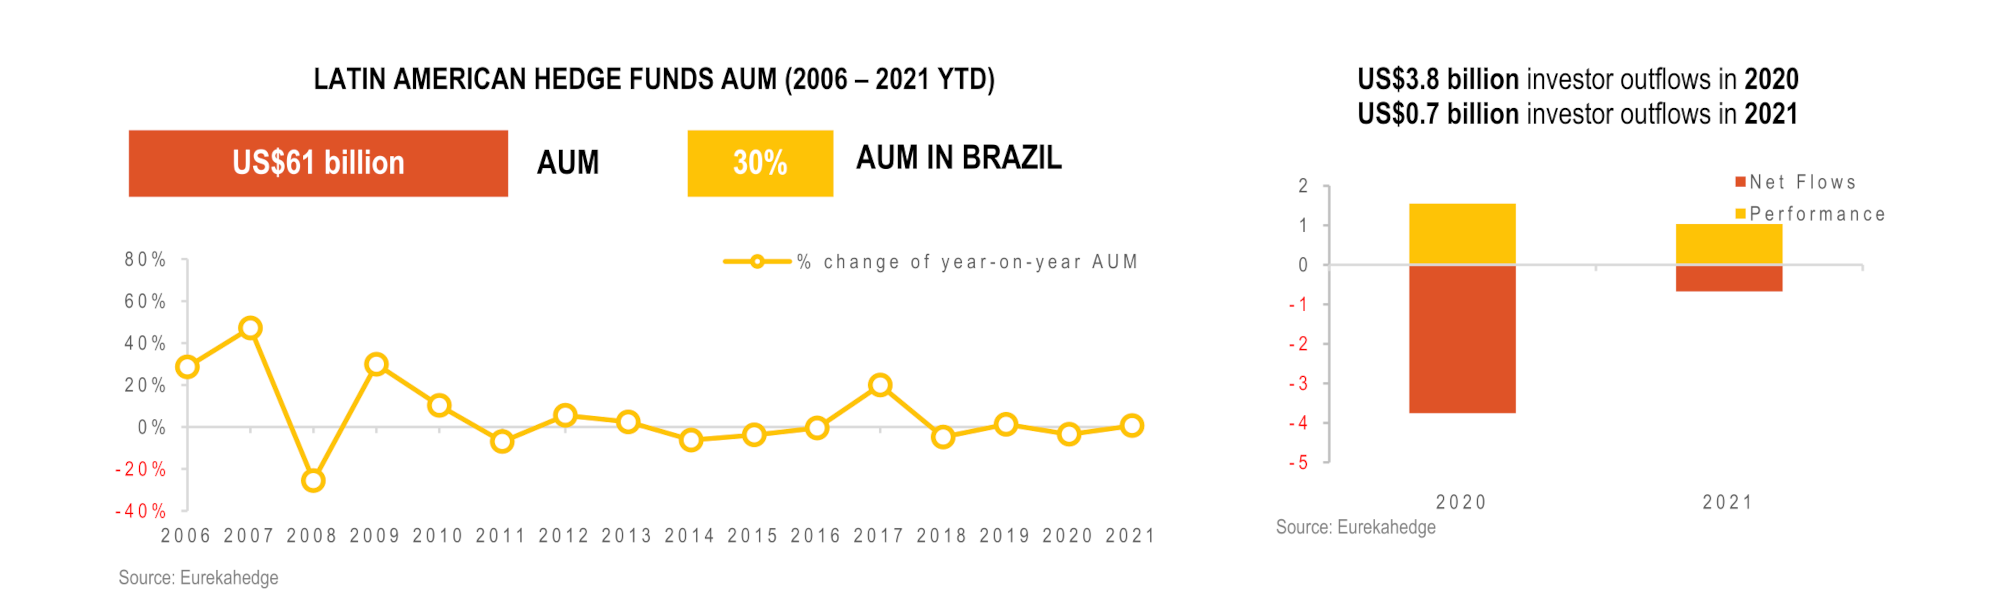 Latin American Hedge Funds Infographic February 2022 - AUM